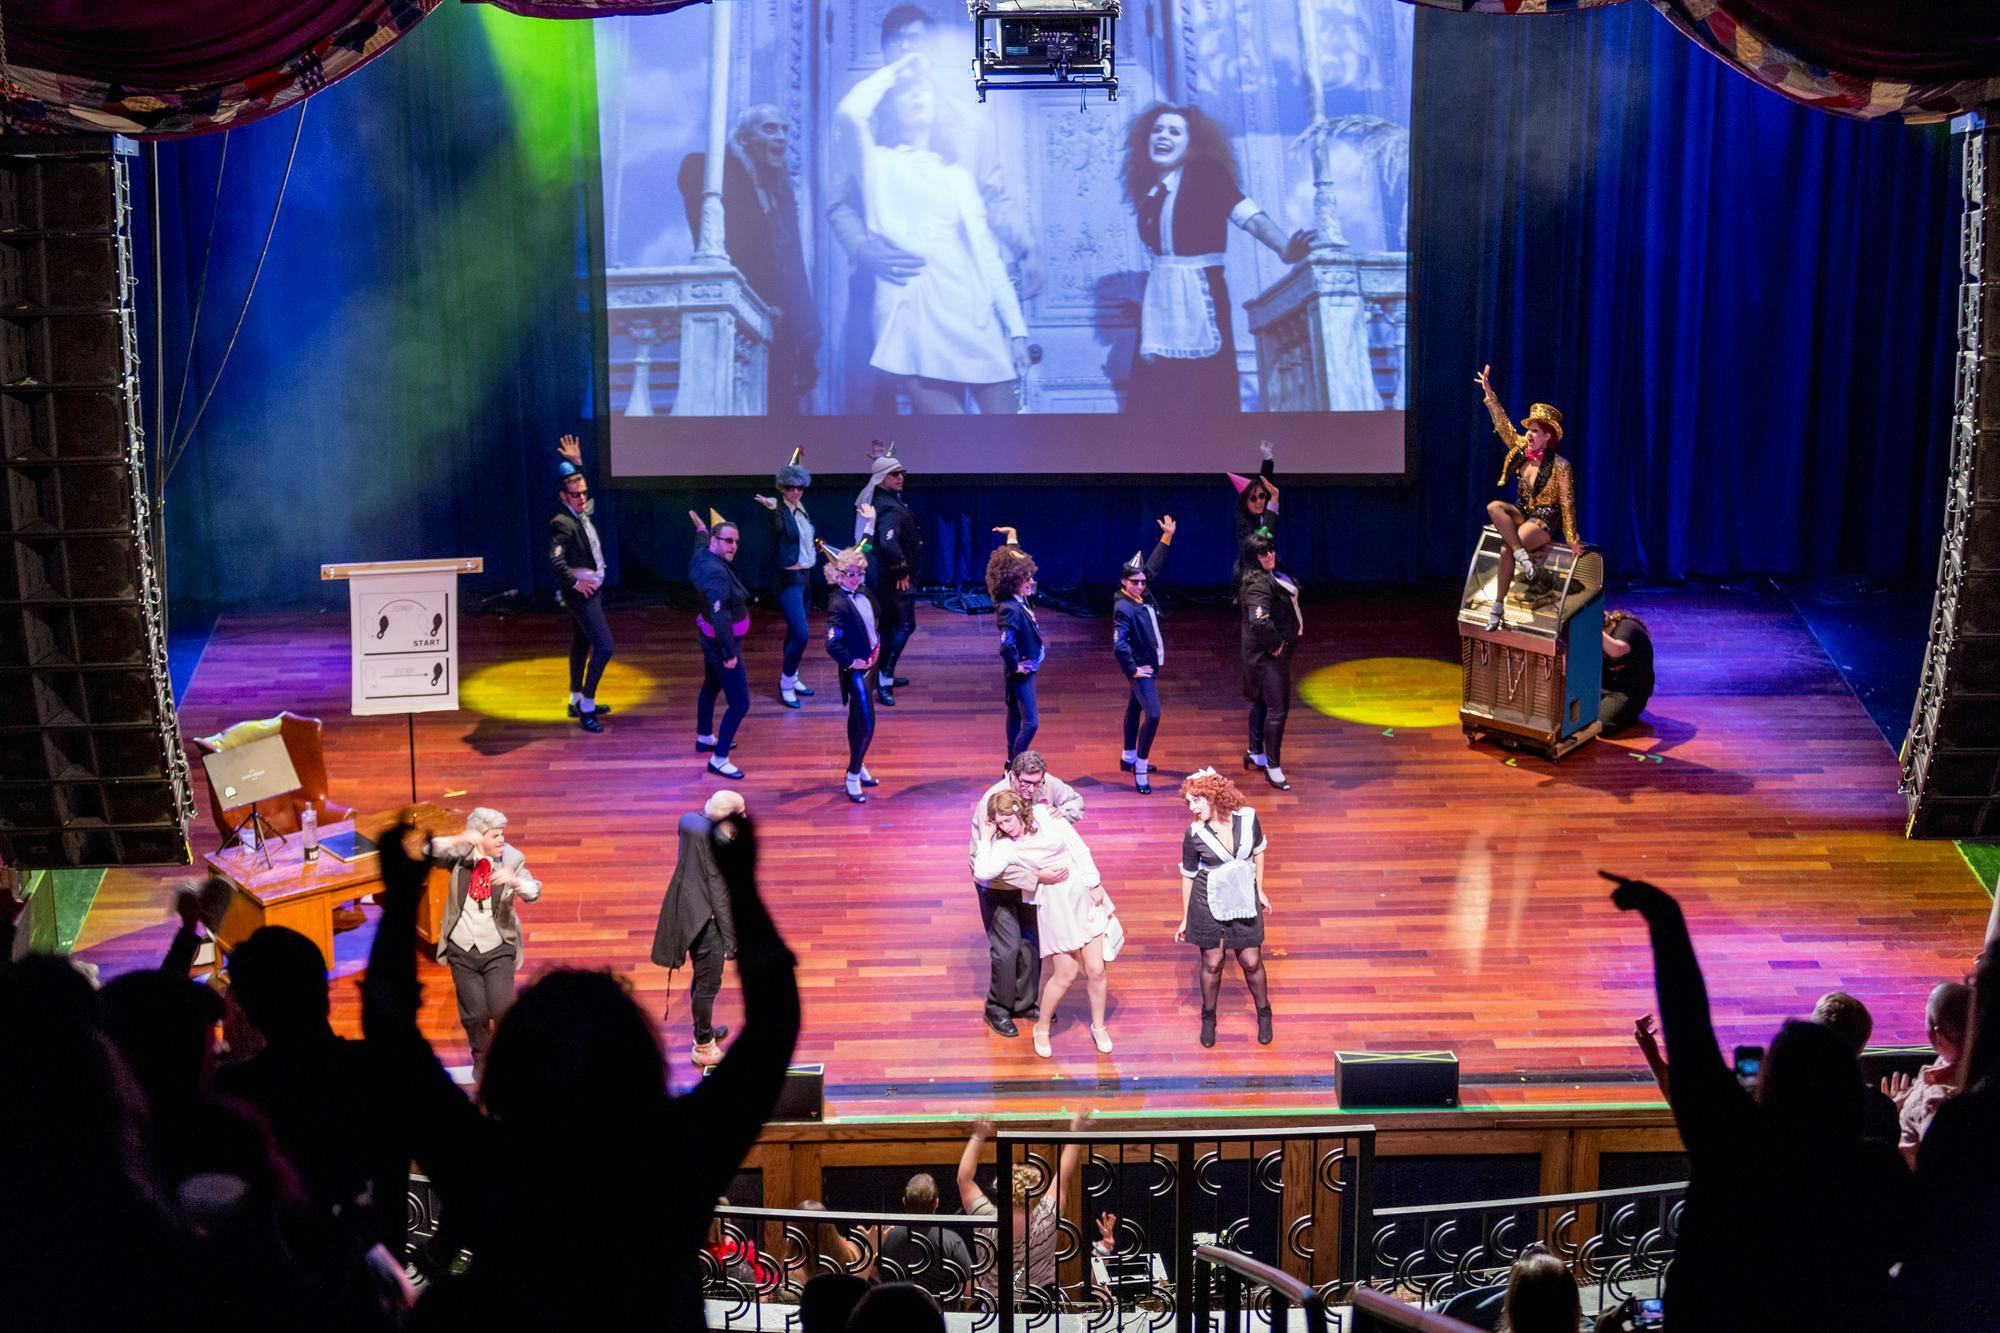 "The Rocky Horror Picture Show" being performed on stage. Photo courtesy of Wharton Center.